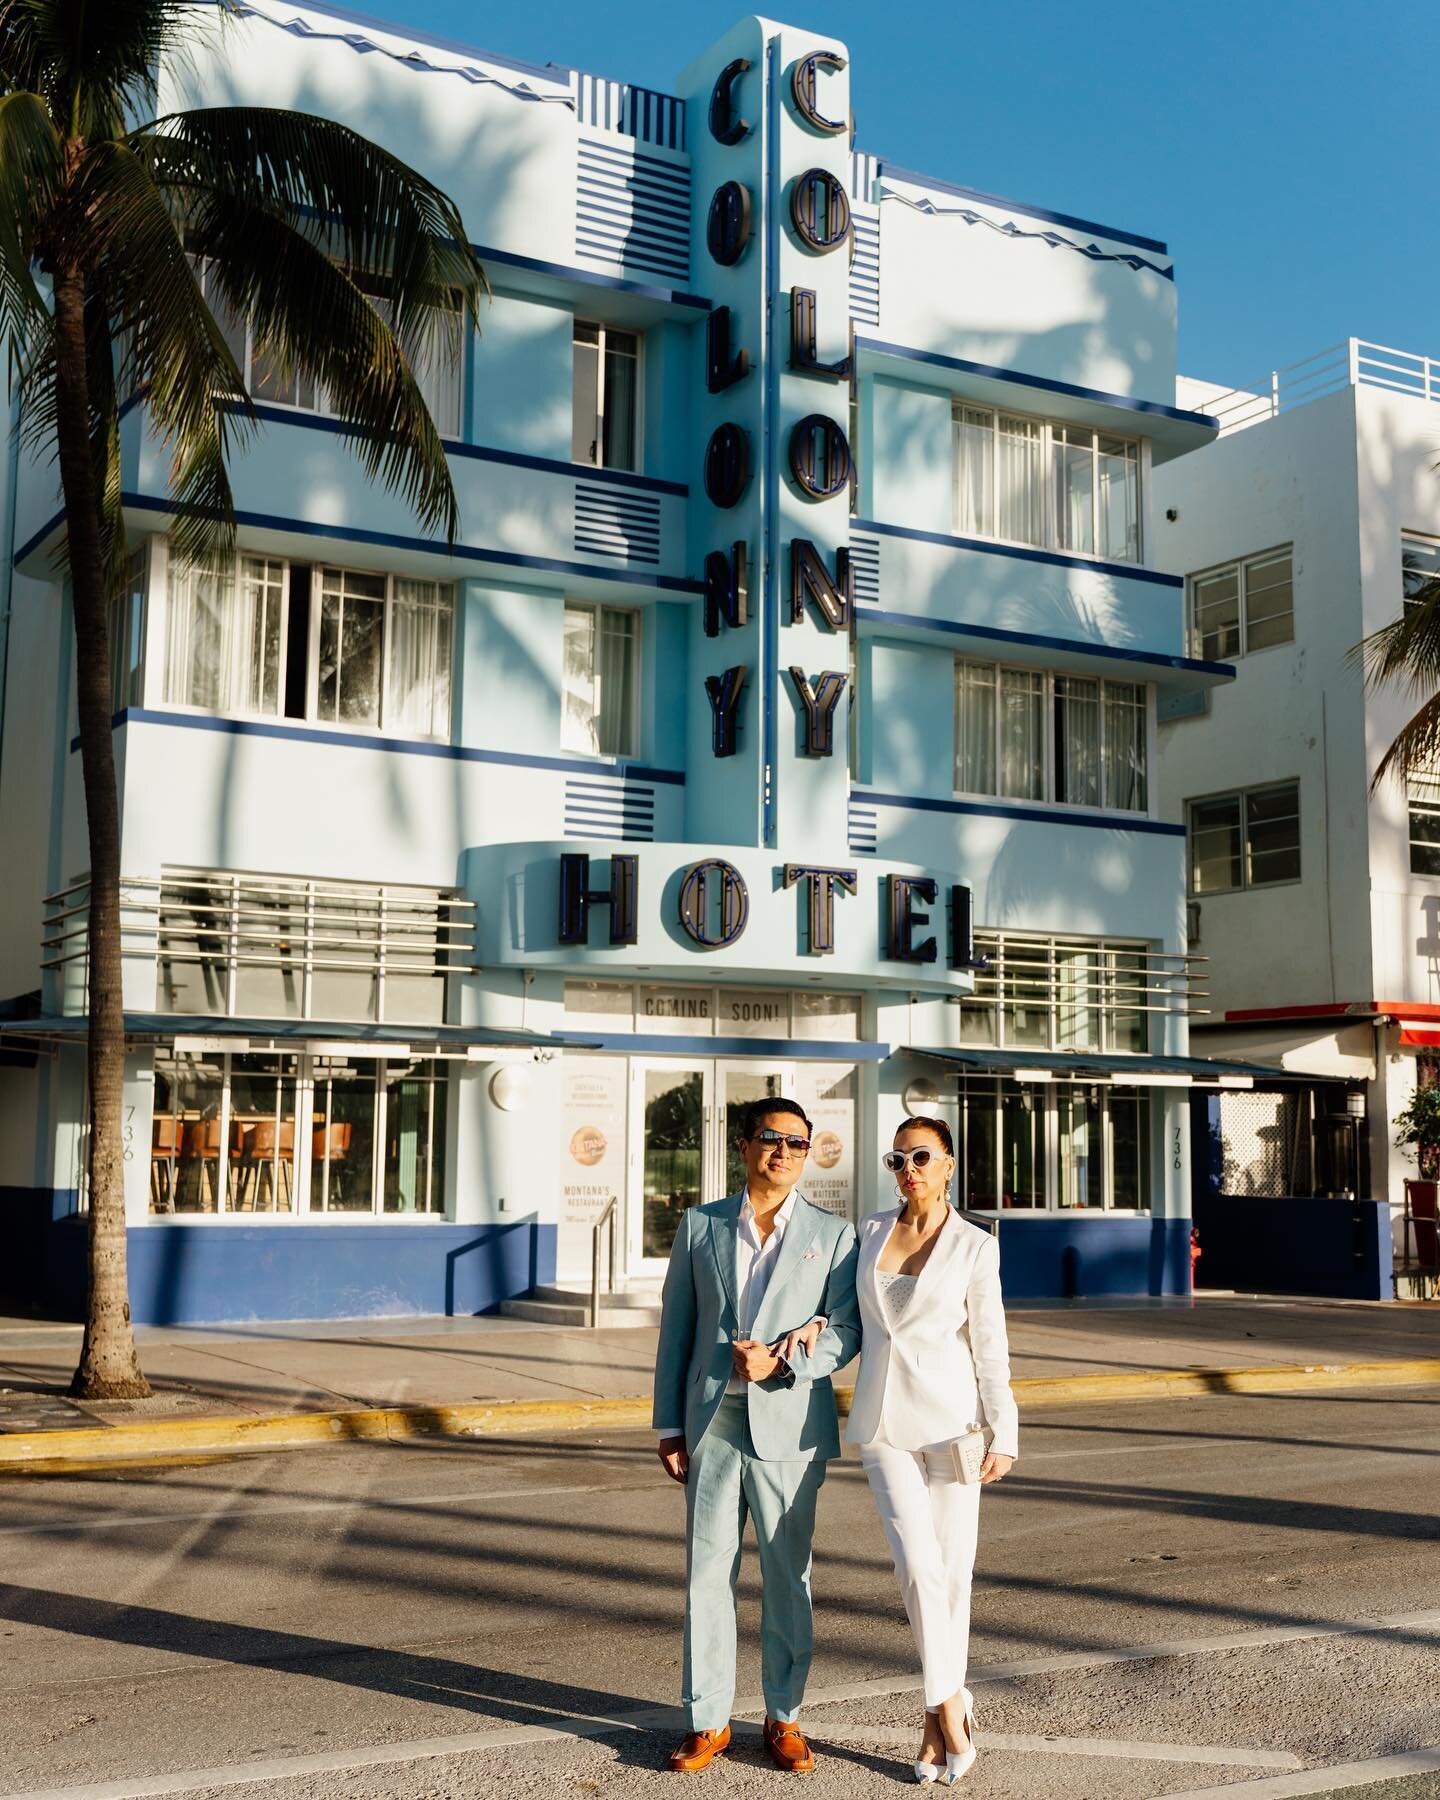 Let&rsquo;s do La Playa : Miami Vice Style 🌴 🕶️ 

For months, I&rsquo;ve been excited to capture and work with one of my long time followers @shireensandoval for her engagement and session. This past Monday, I was able to do such that Historical Oc